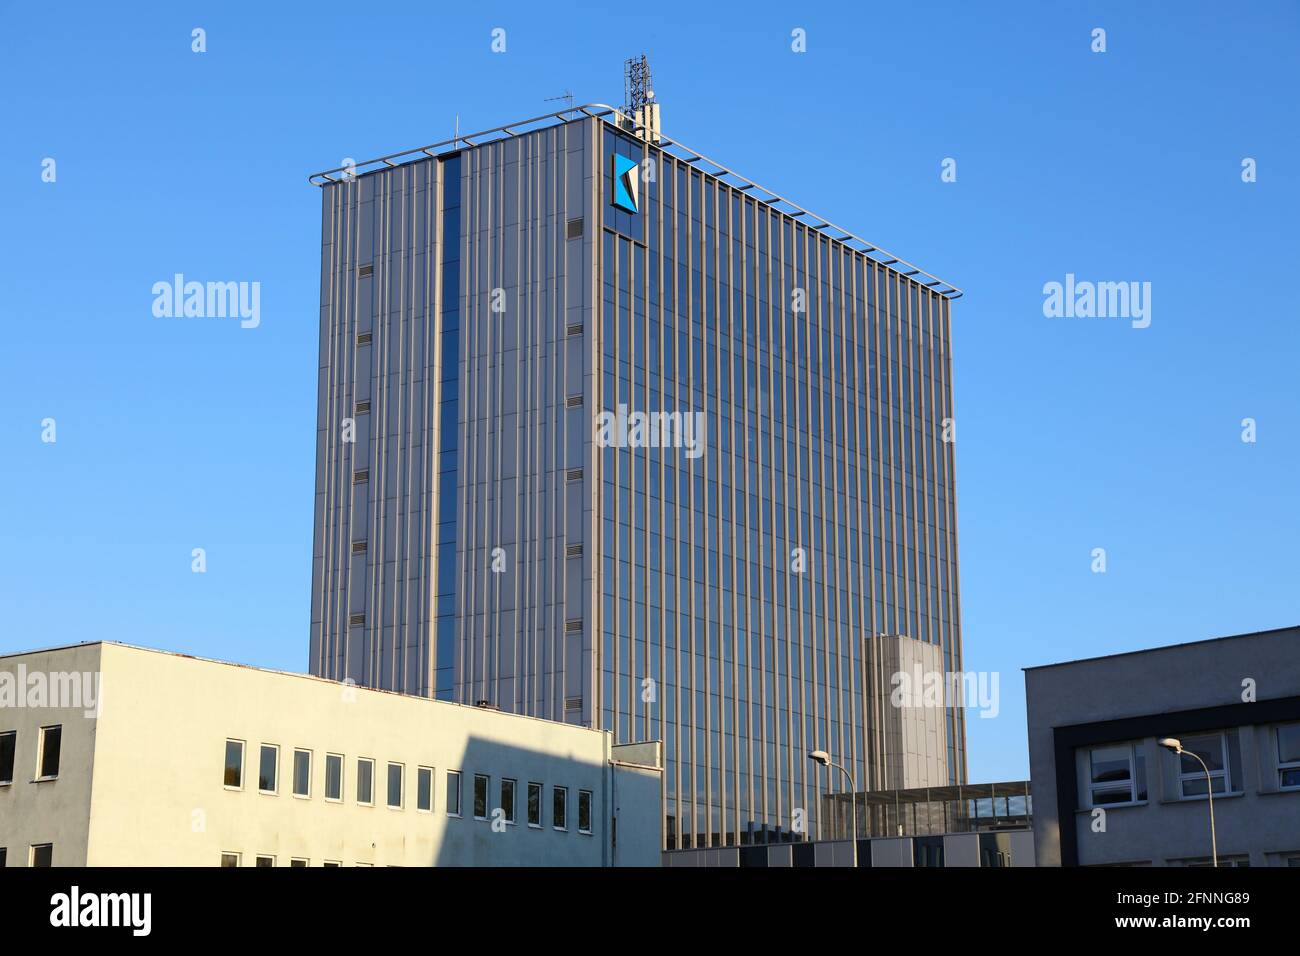 RYBNIK, POLAND - MAY 11, 2021: Business Center K1 office building in Rybnik, Poland. Rybnik is an important industrial city in Southern Poland. Stock Photo